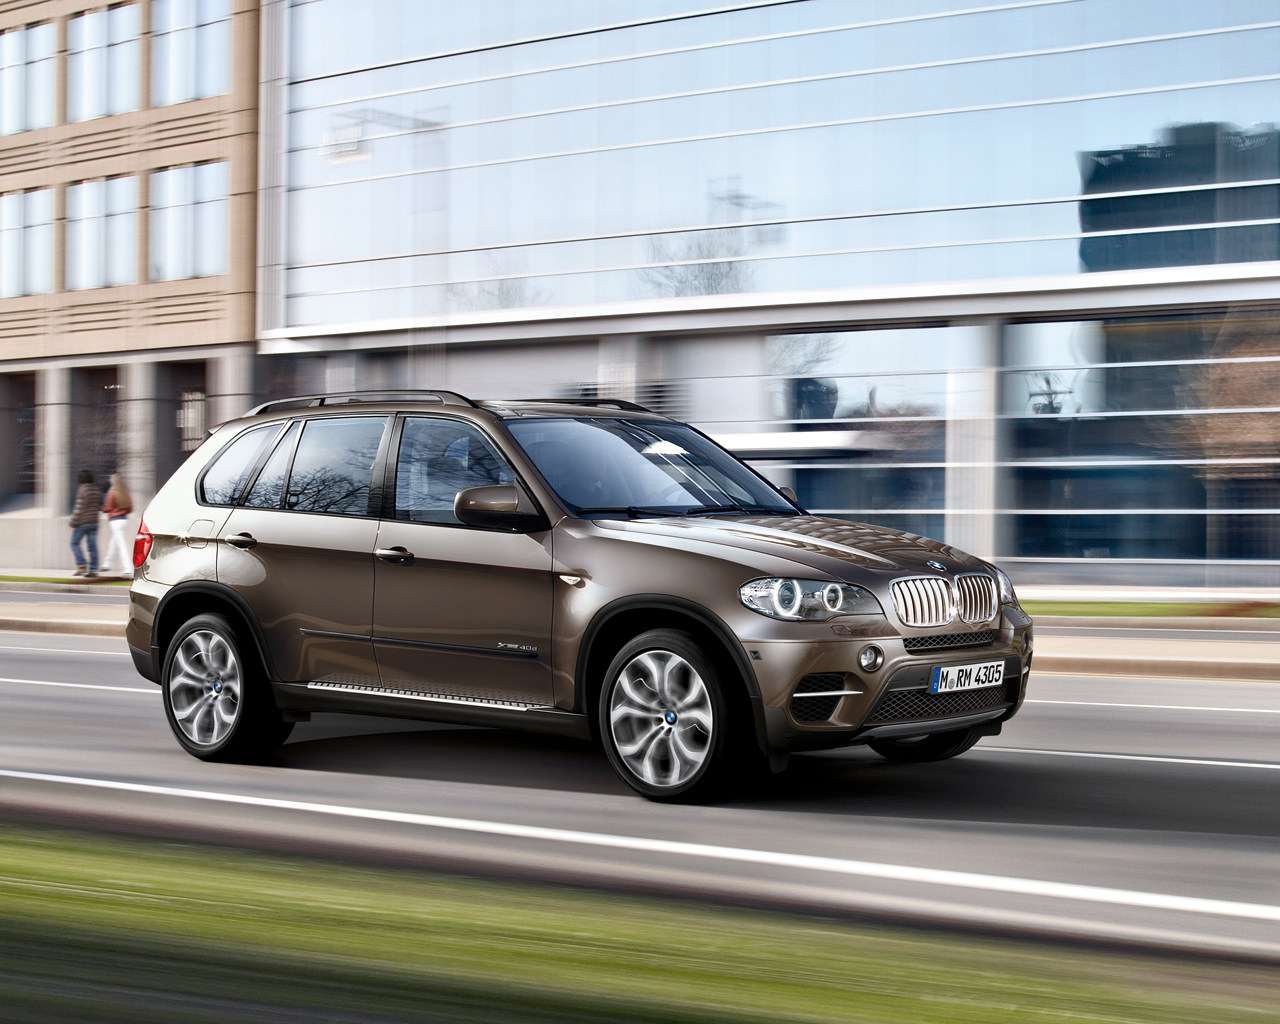 The new BMW X5 3